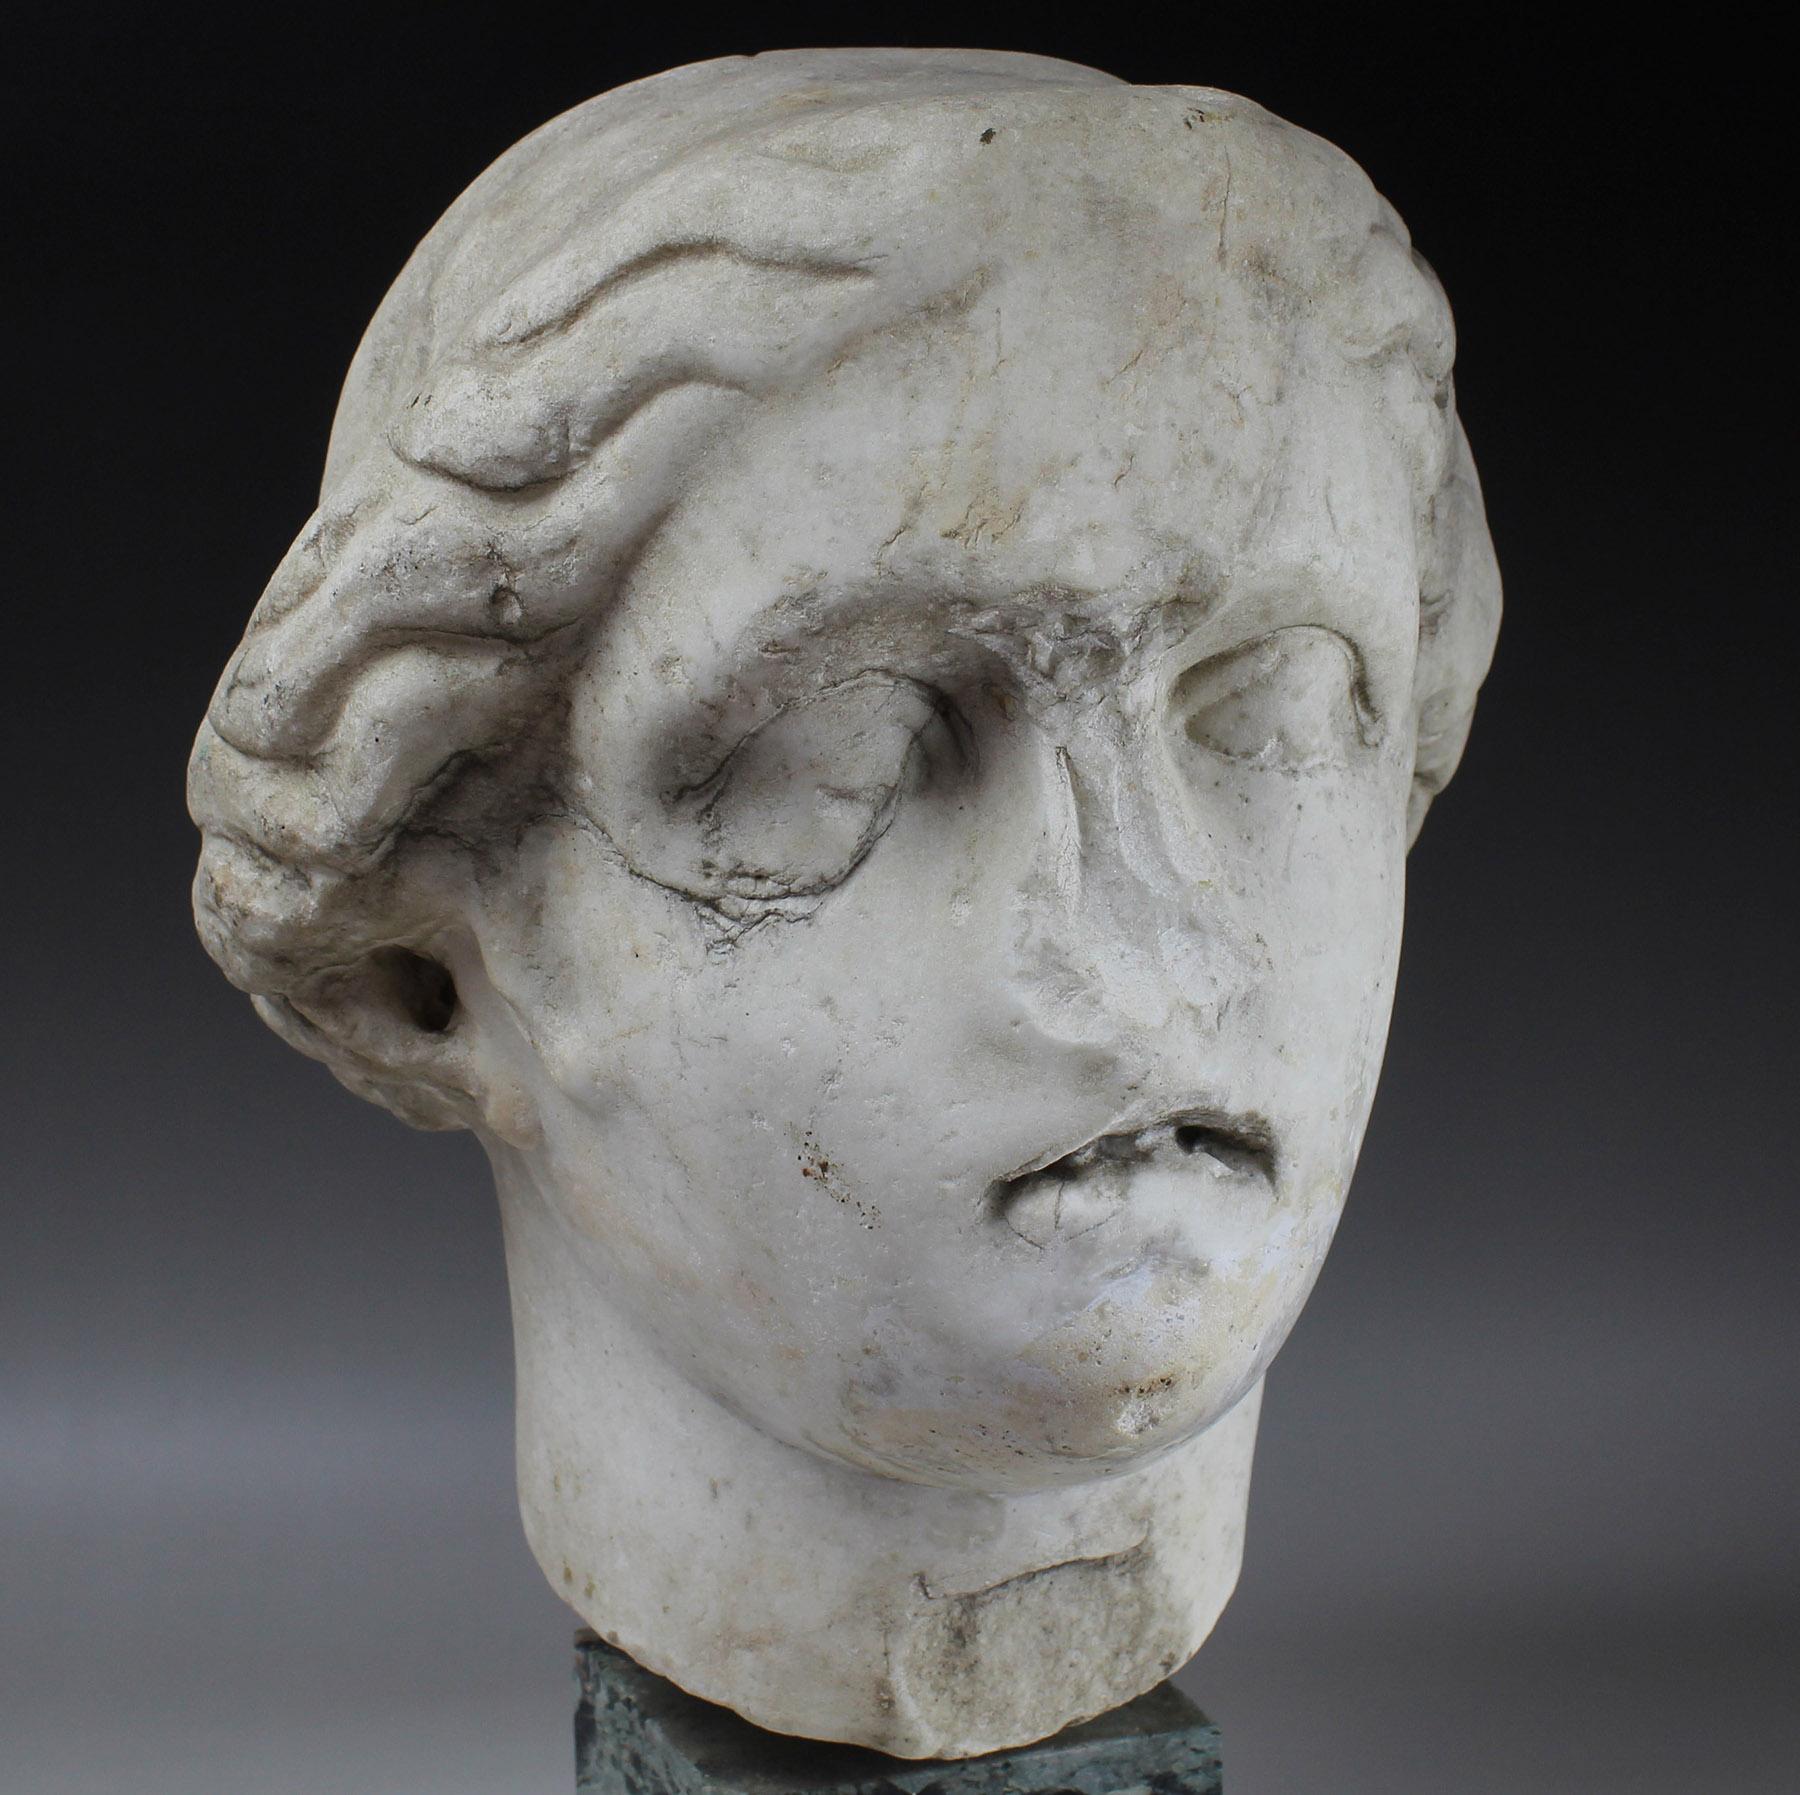 Item: Head of a goddess
Material: Marble
Culture: Roman
Period: 1st Century B.C – 1st Century A.D
Dimensions: 280 mm x 240 mm x 217 mm (without stand), Life size
Condition: Good condition. Include stand
Provenance: Ex French private